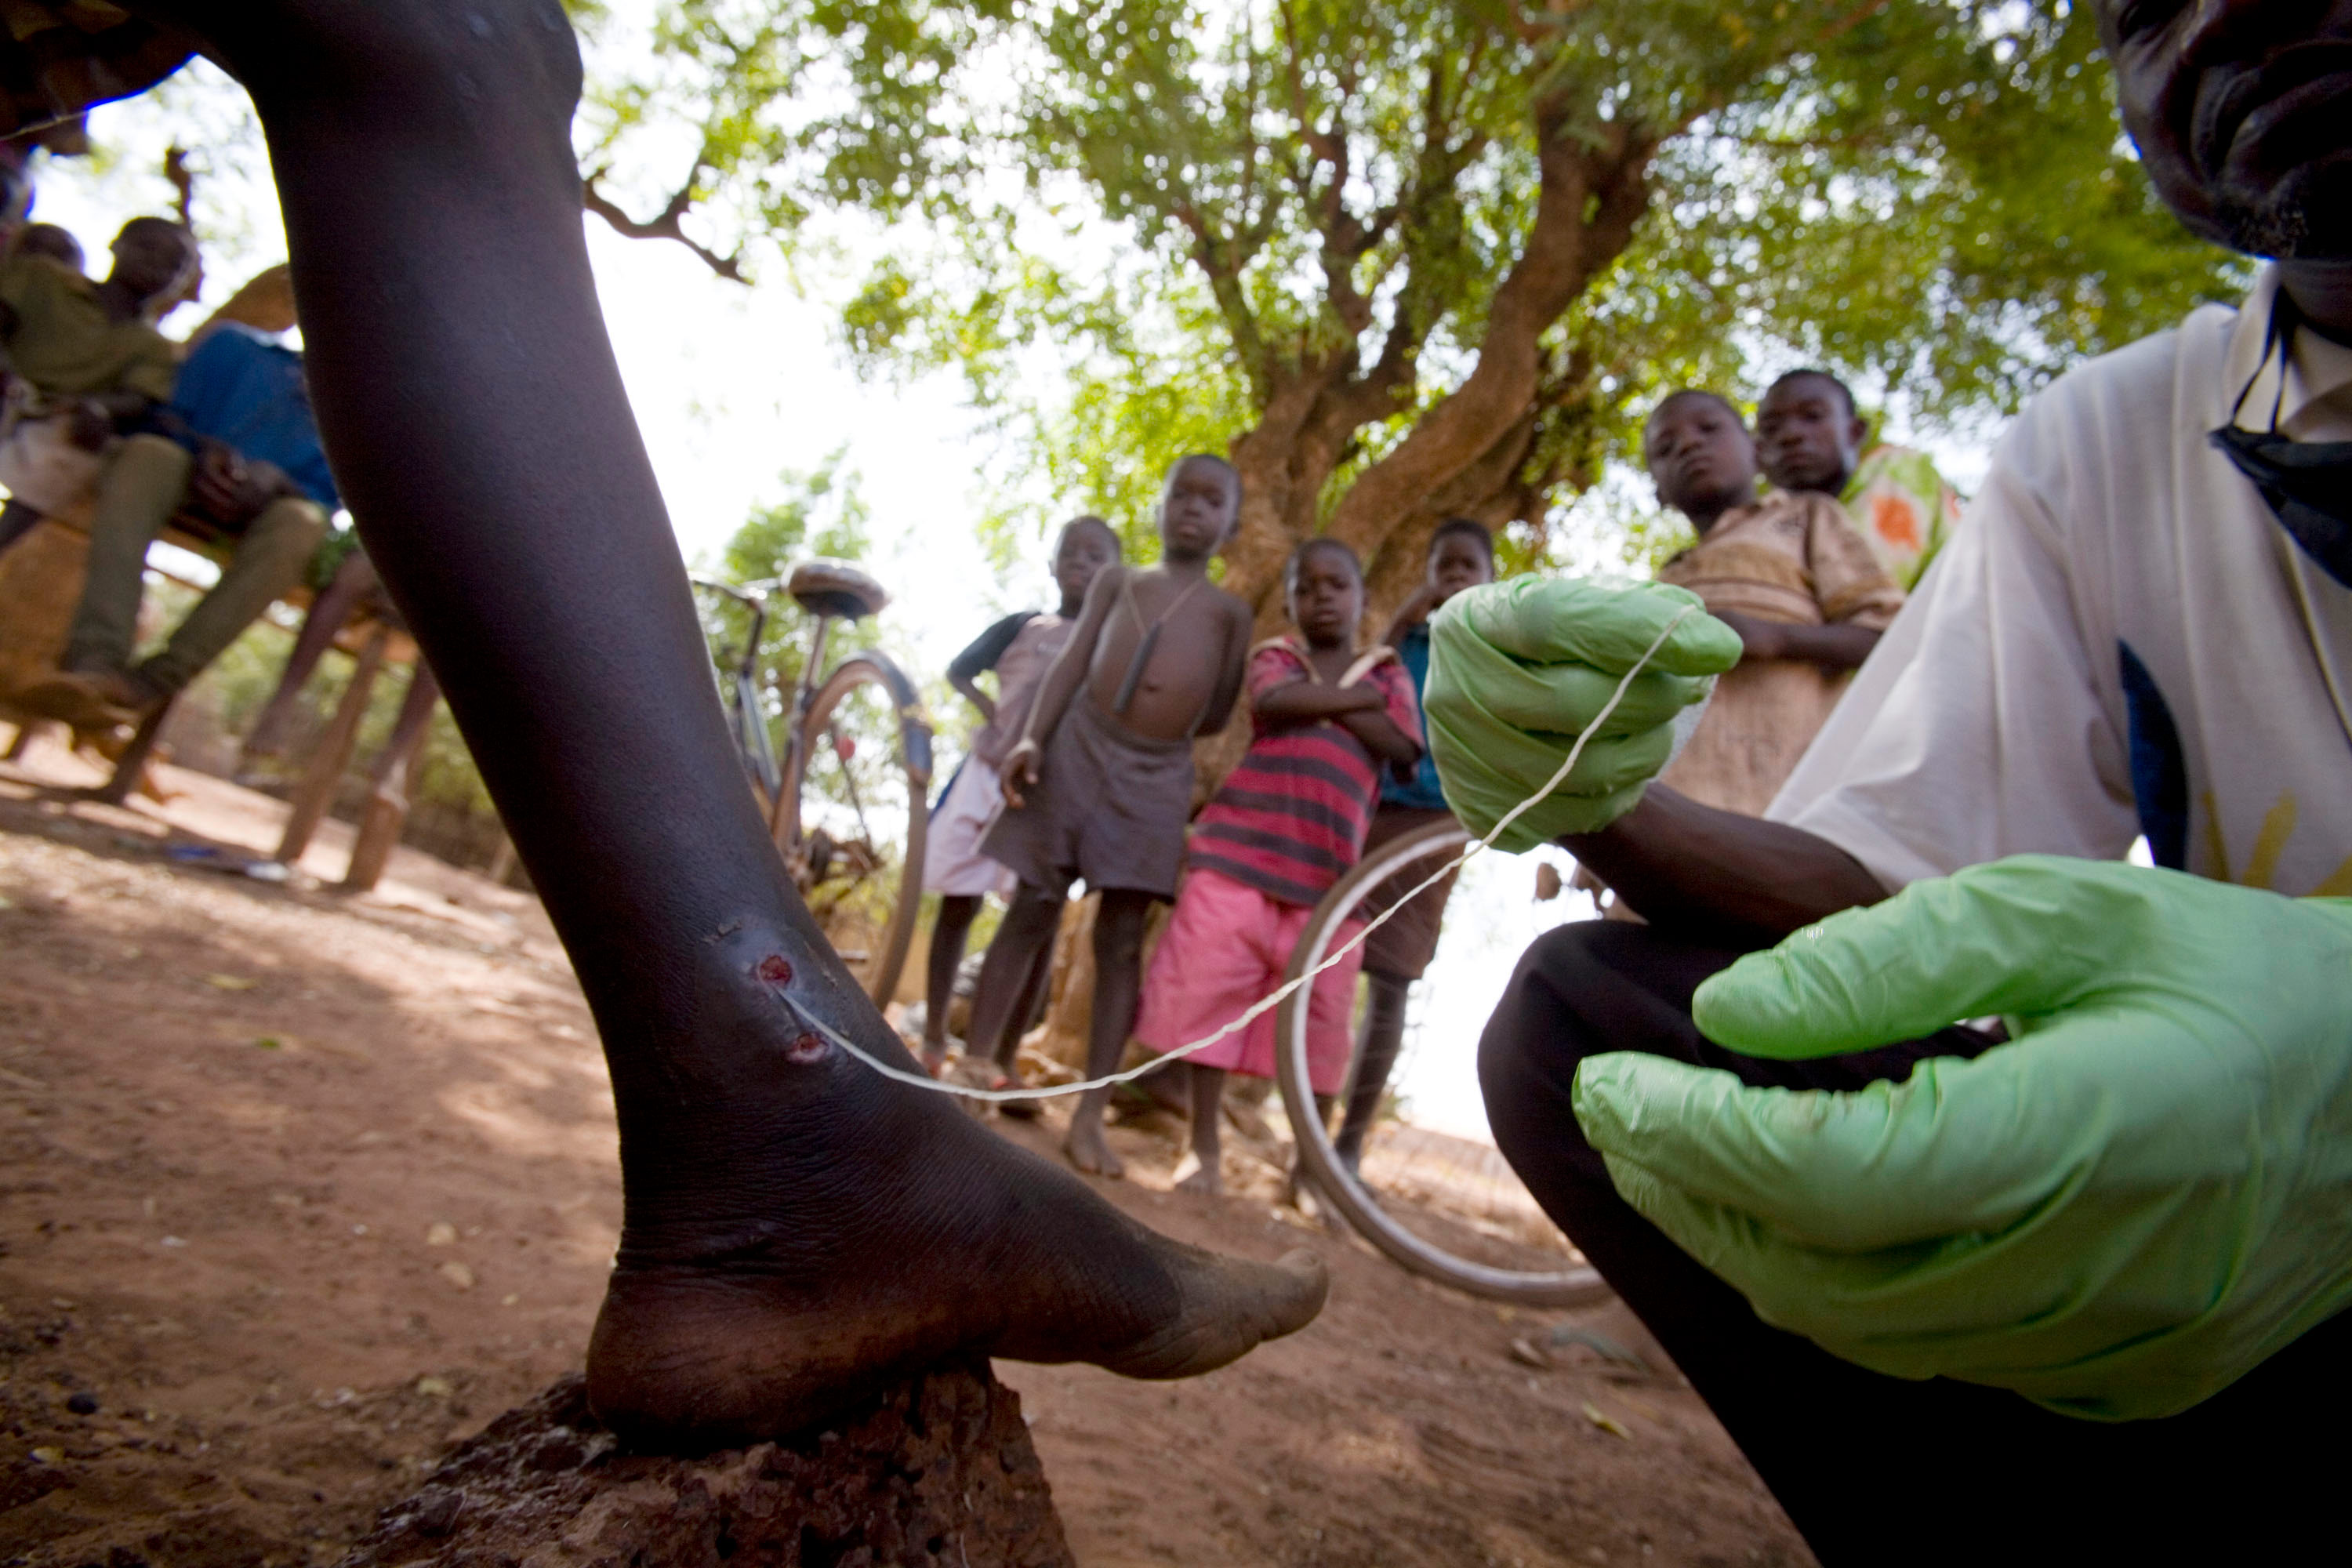 A photo of a Guinea worm being pulled from a child's leg.